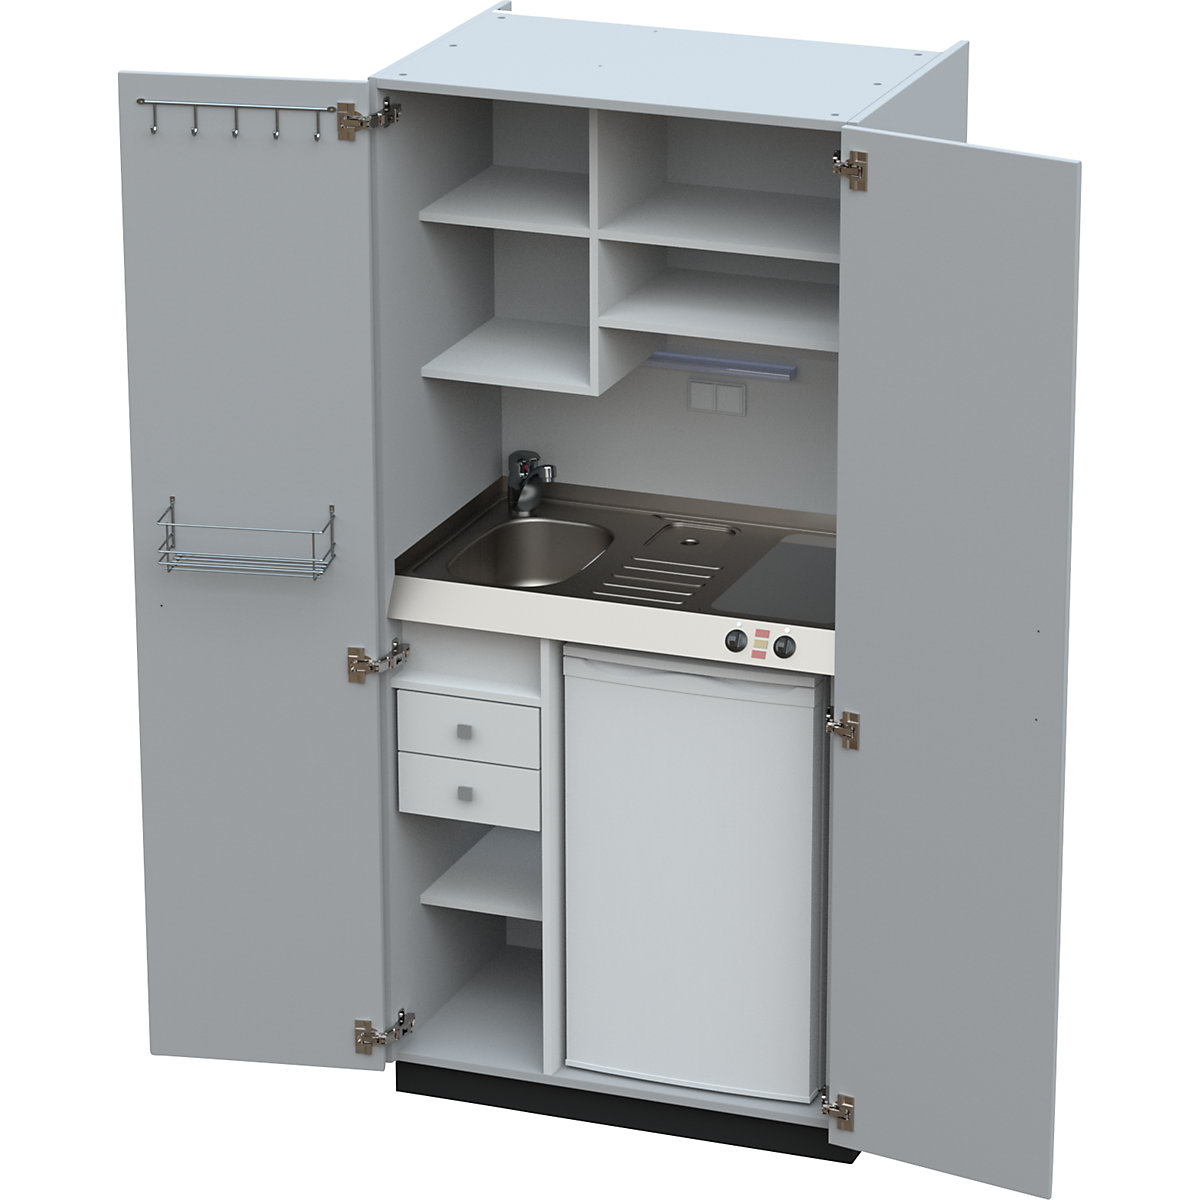 Kitchen unit with hinged doors, 2 glass ceramic hotplates, basin at left, grey, 1956 x 900 x 650 mm-7